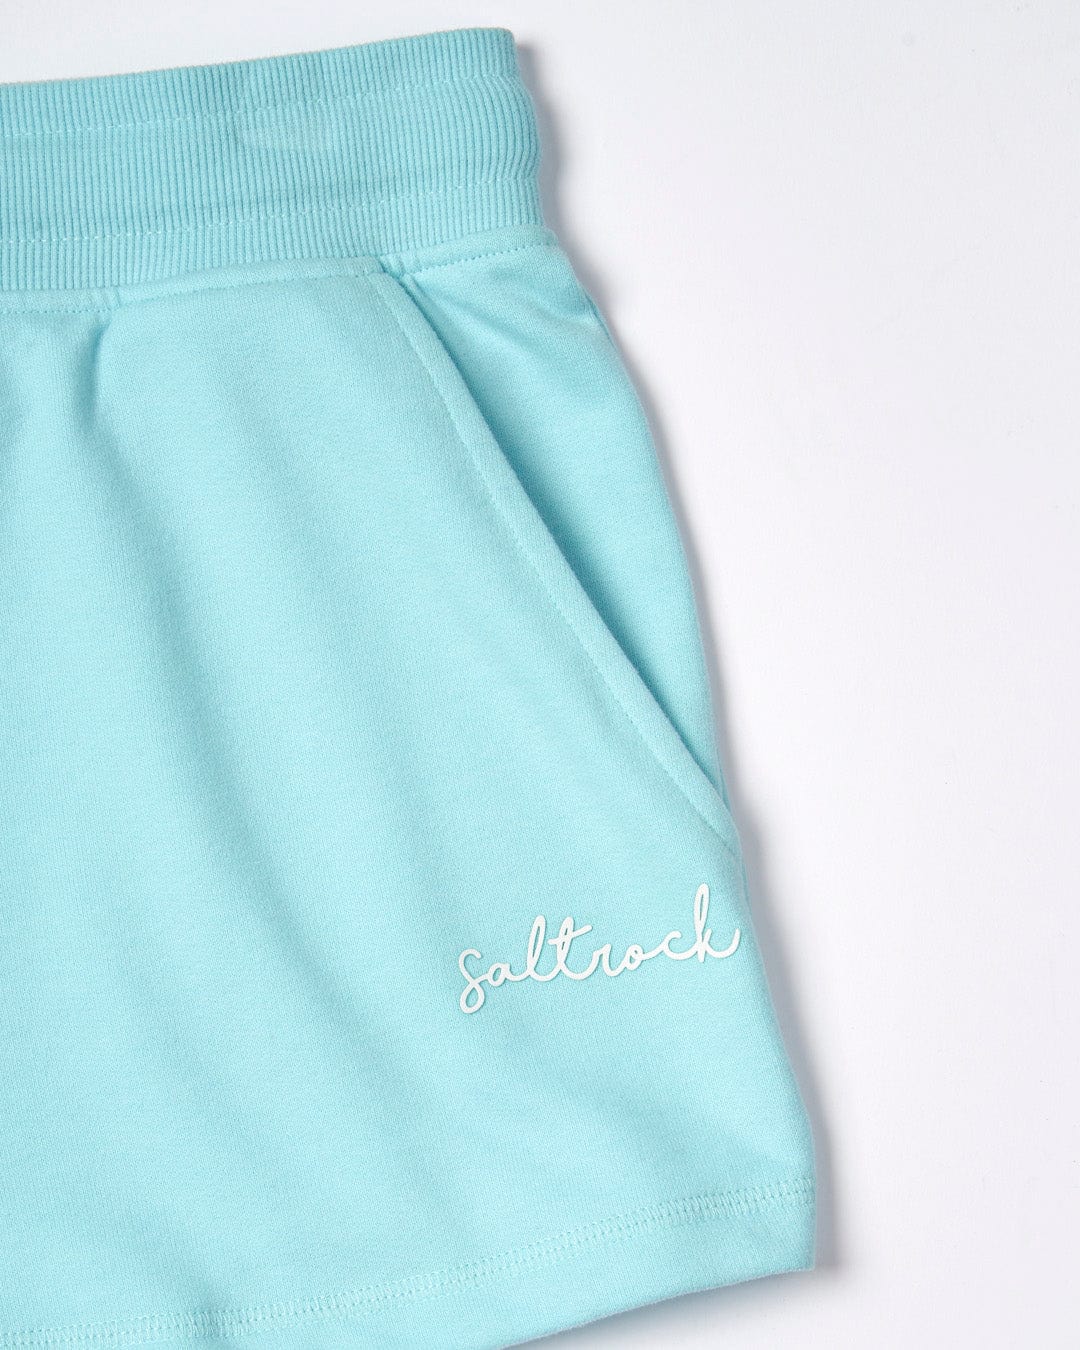 Close-up of a light blue Velator - Womens Short material, part of a garment with a ribbed waistband and the word "Saltrock" embroidered in white.